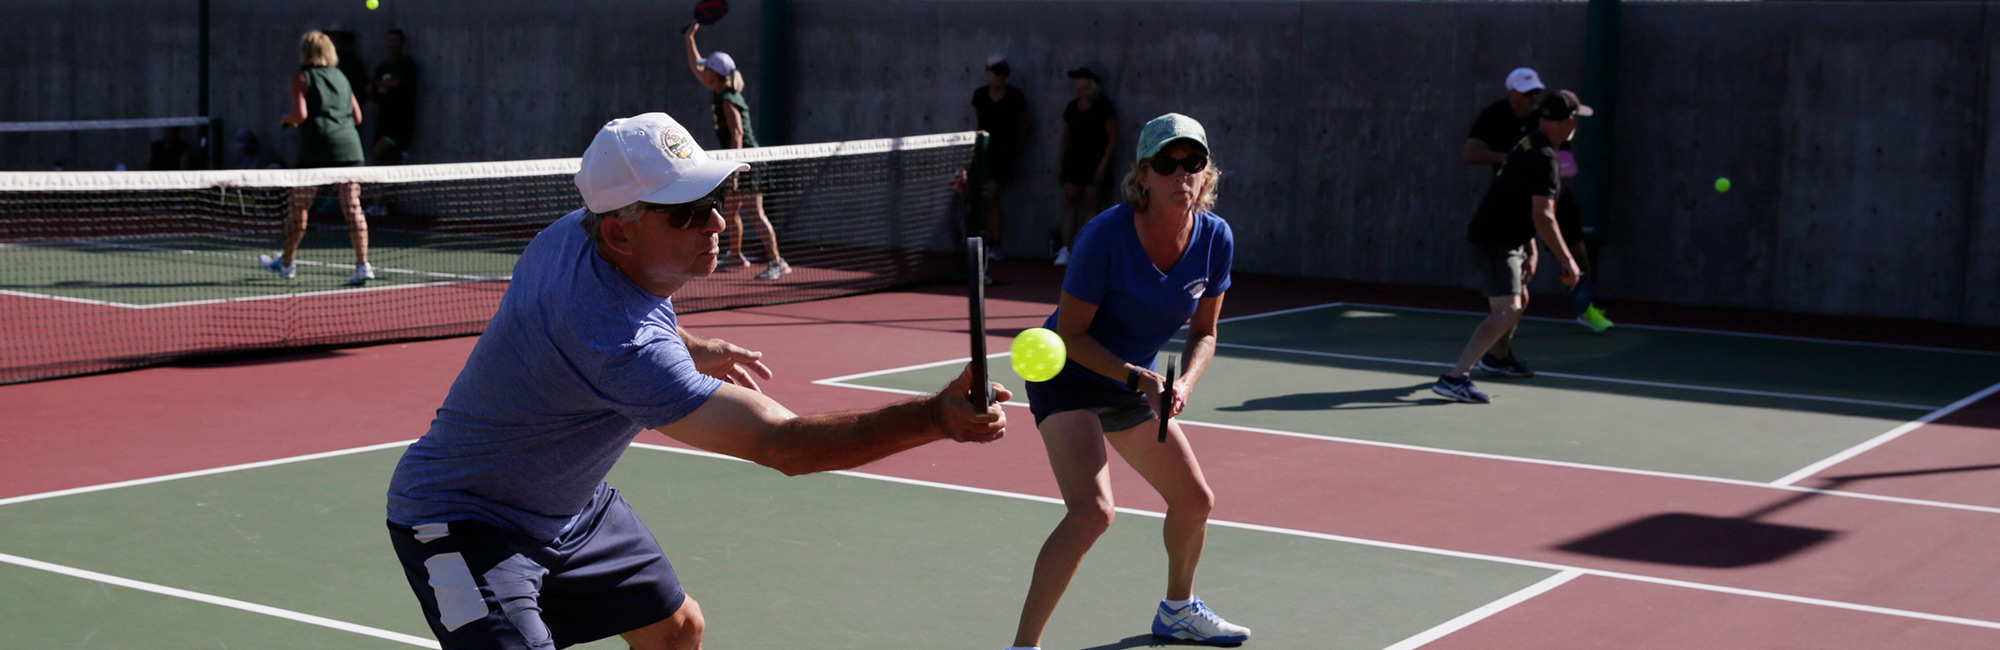 Adult Pickleball Lessons and Drills